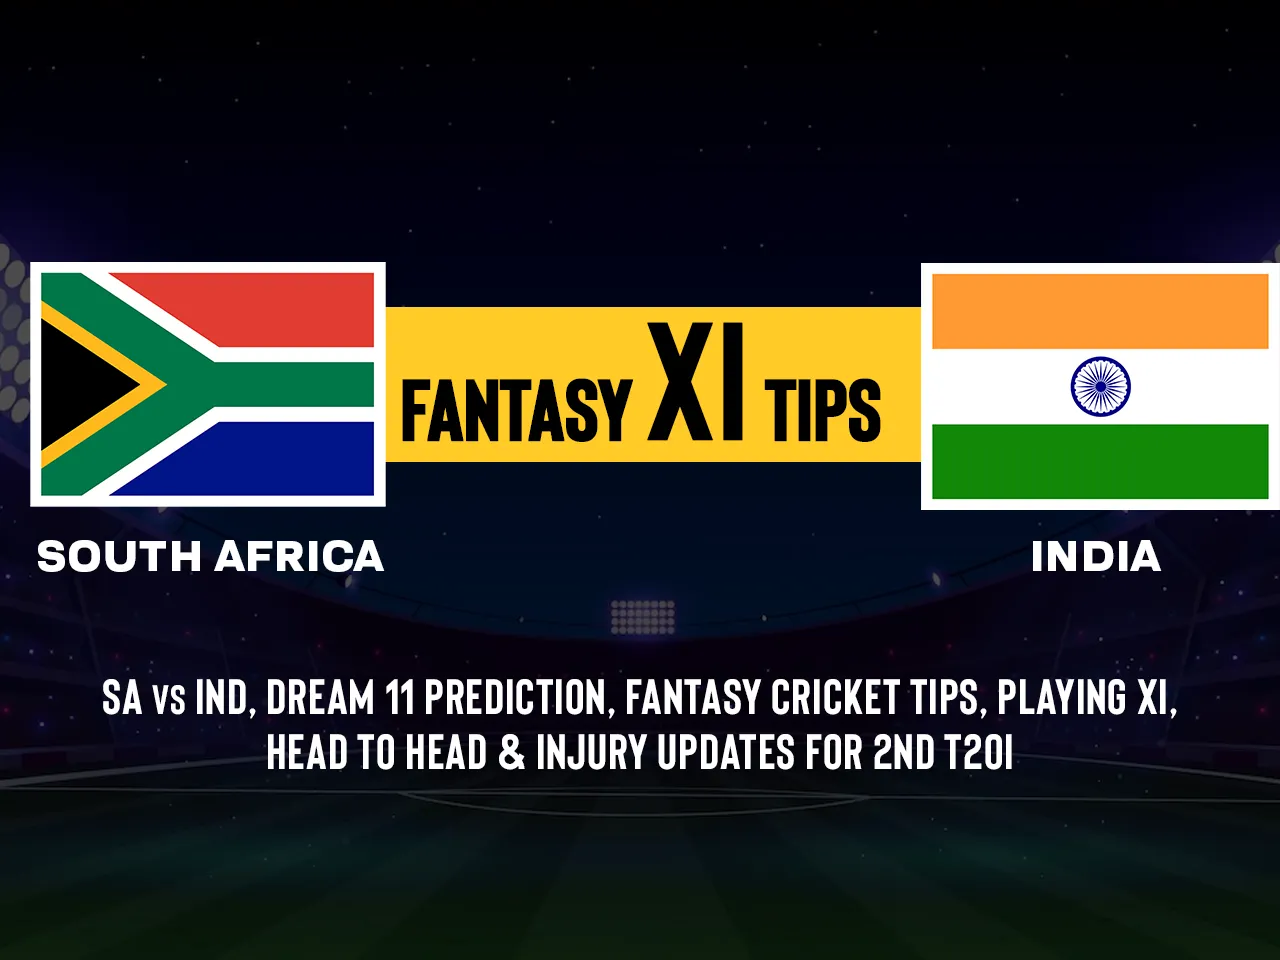 South Africa vs India 2023: SA vs IND Dream11 Prediction, Playing XI, Head-to-Head Stats, and Pitch Report for 2nd T20I